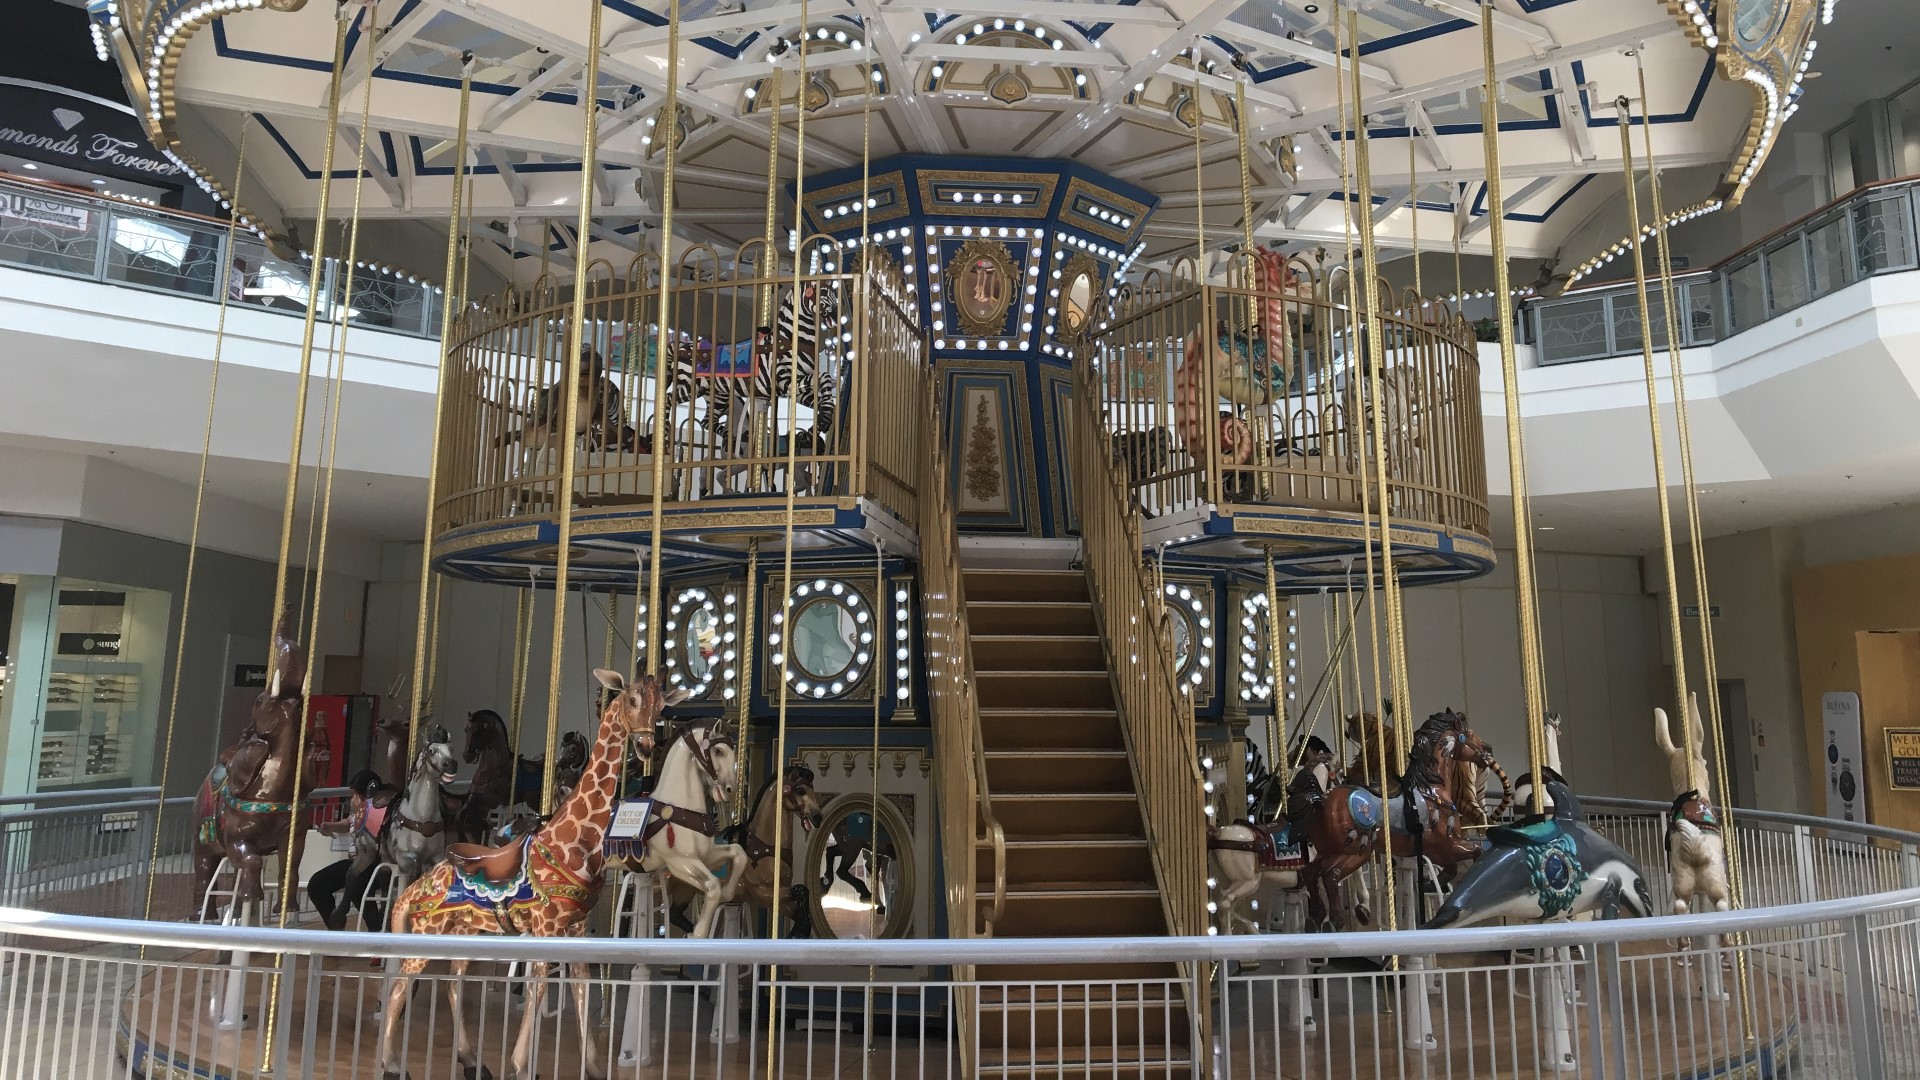 It's been a fixture in the Solano Town Center mall for more than a decade, but now the Fun Time Carousel has less than a week left before it's gone for good.